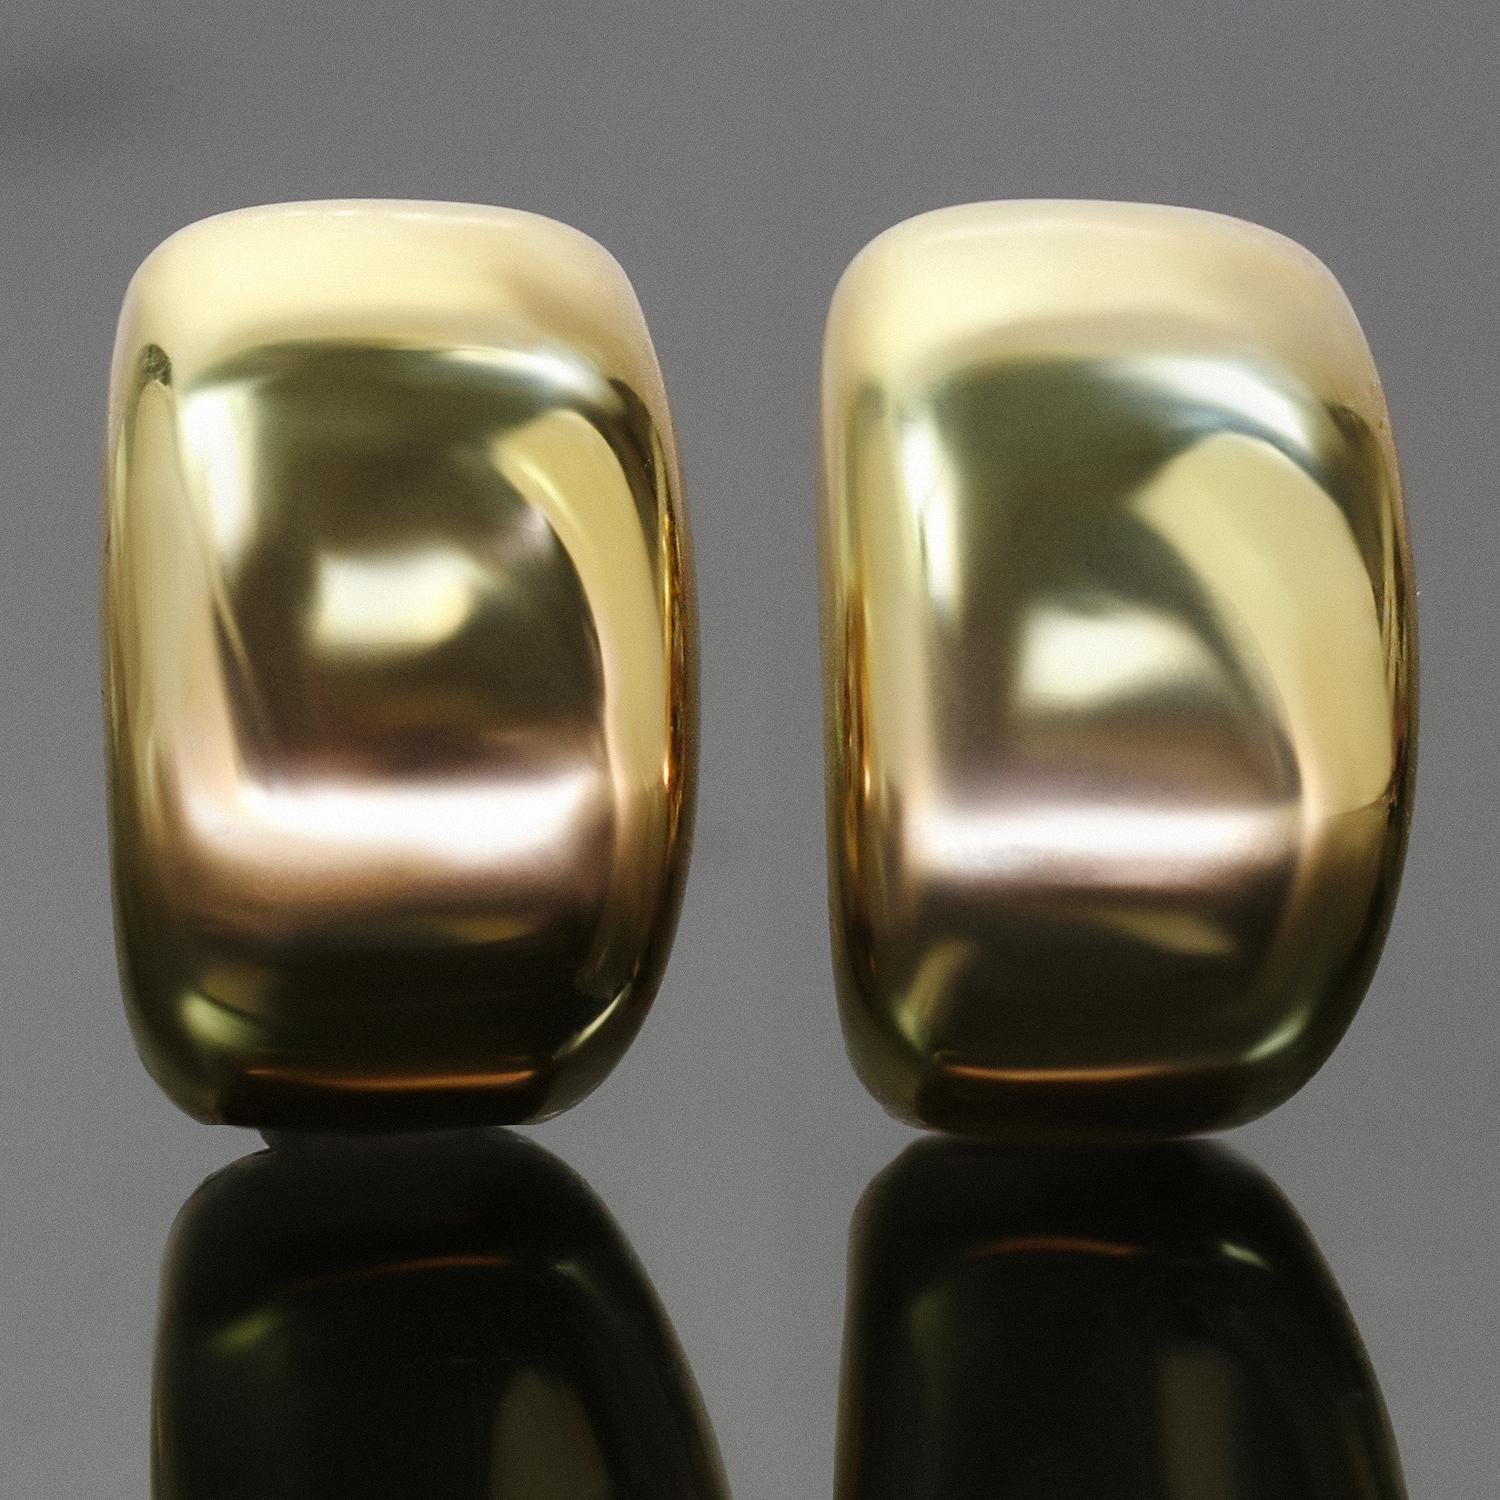 These classic Cartier earrings from the timeless Nouvelle Vague collection are crafted in 18k yellow gold. Made in France circa 1990s. Measurements: 0.43